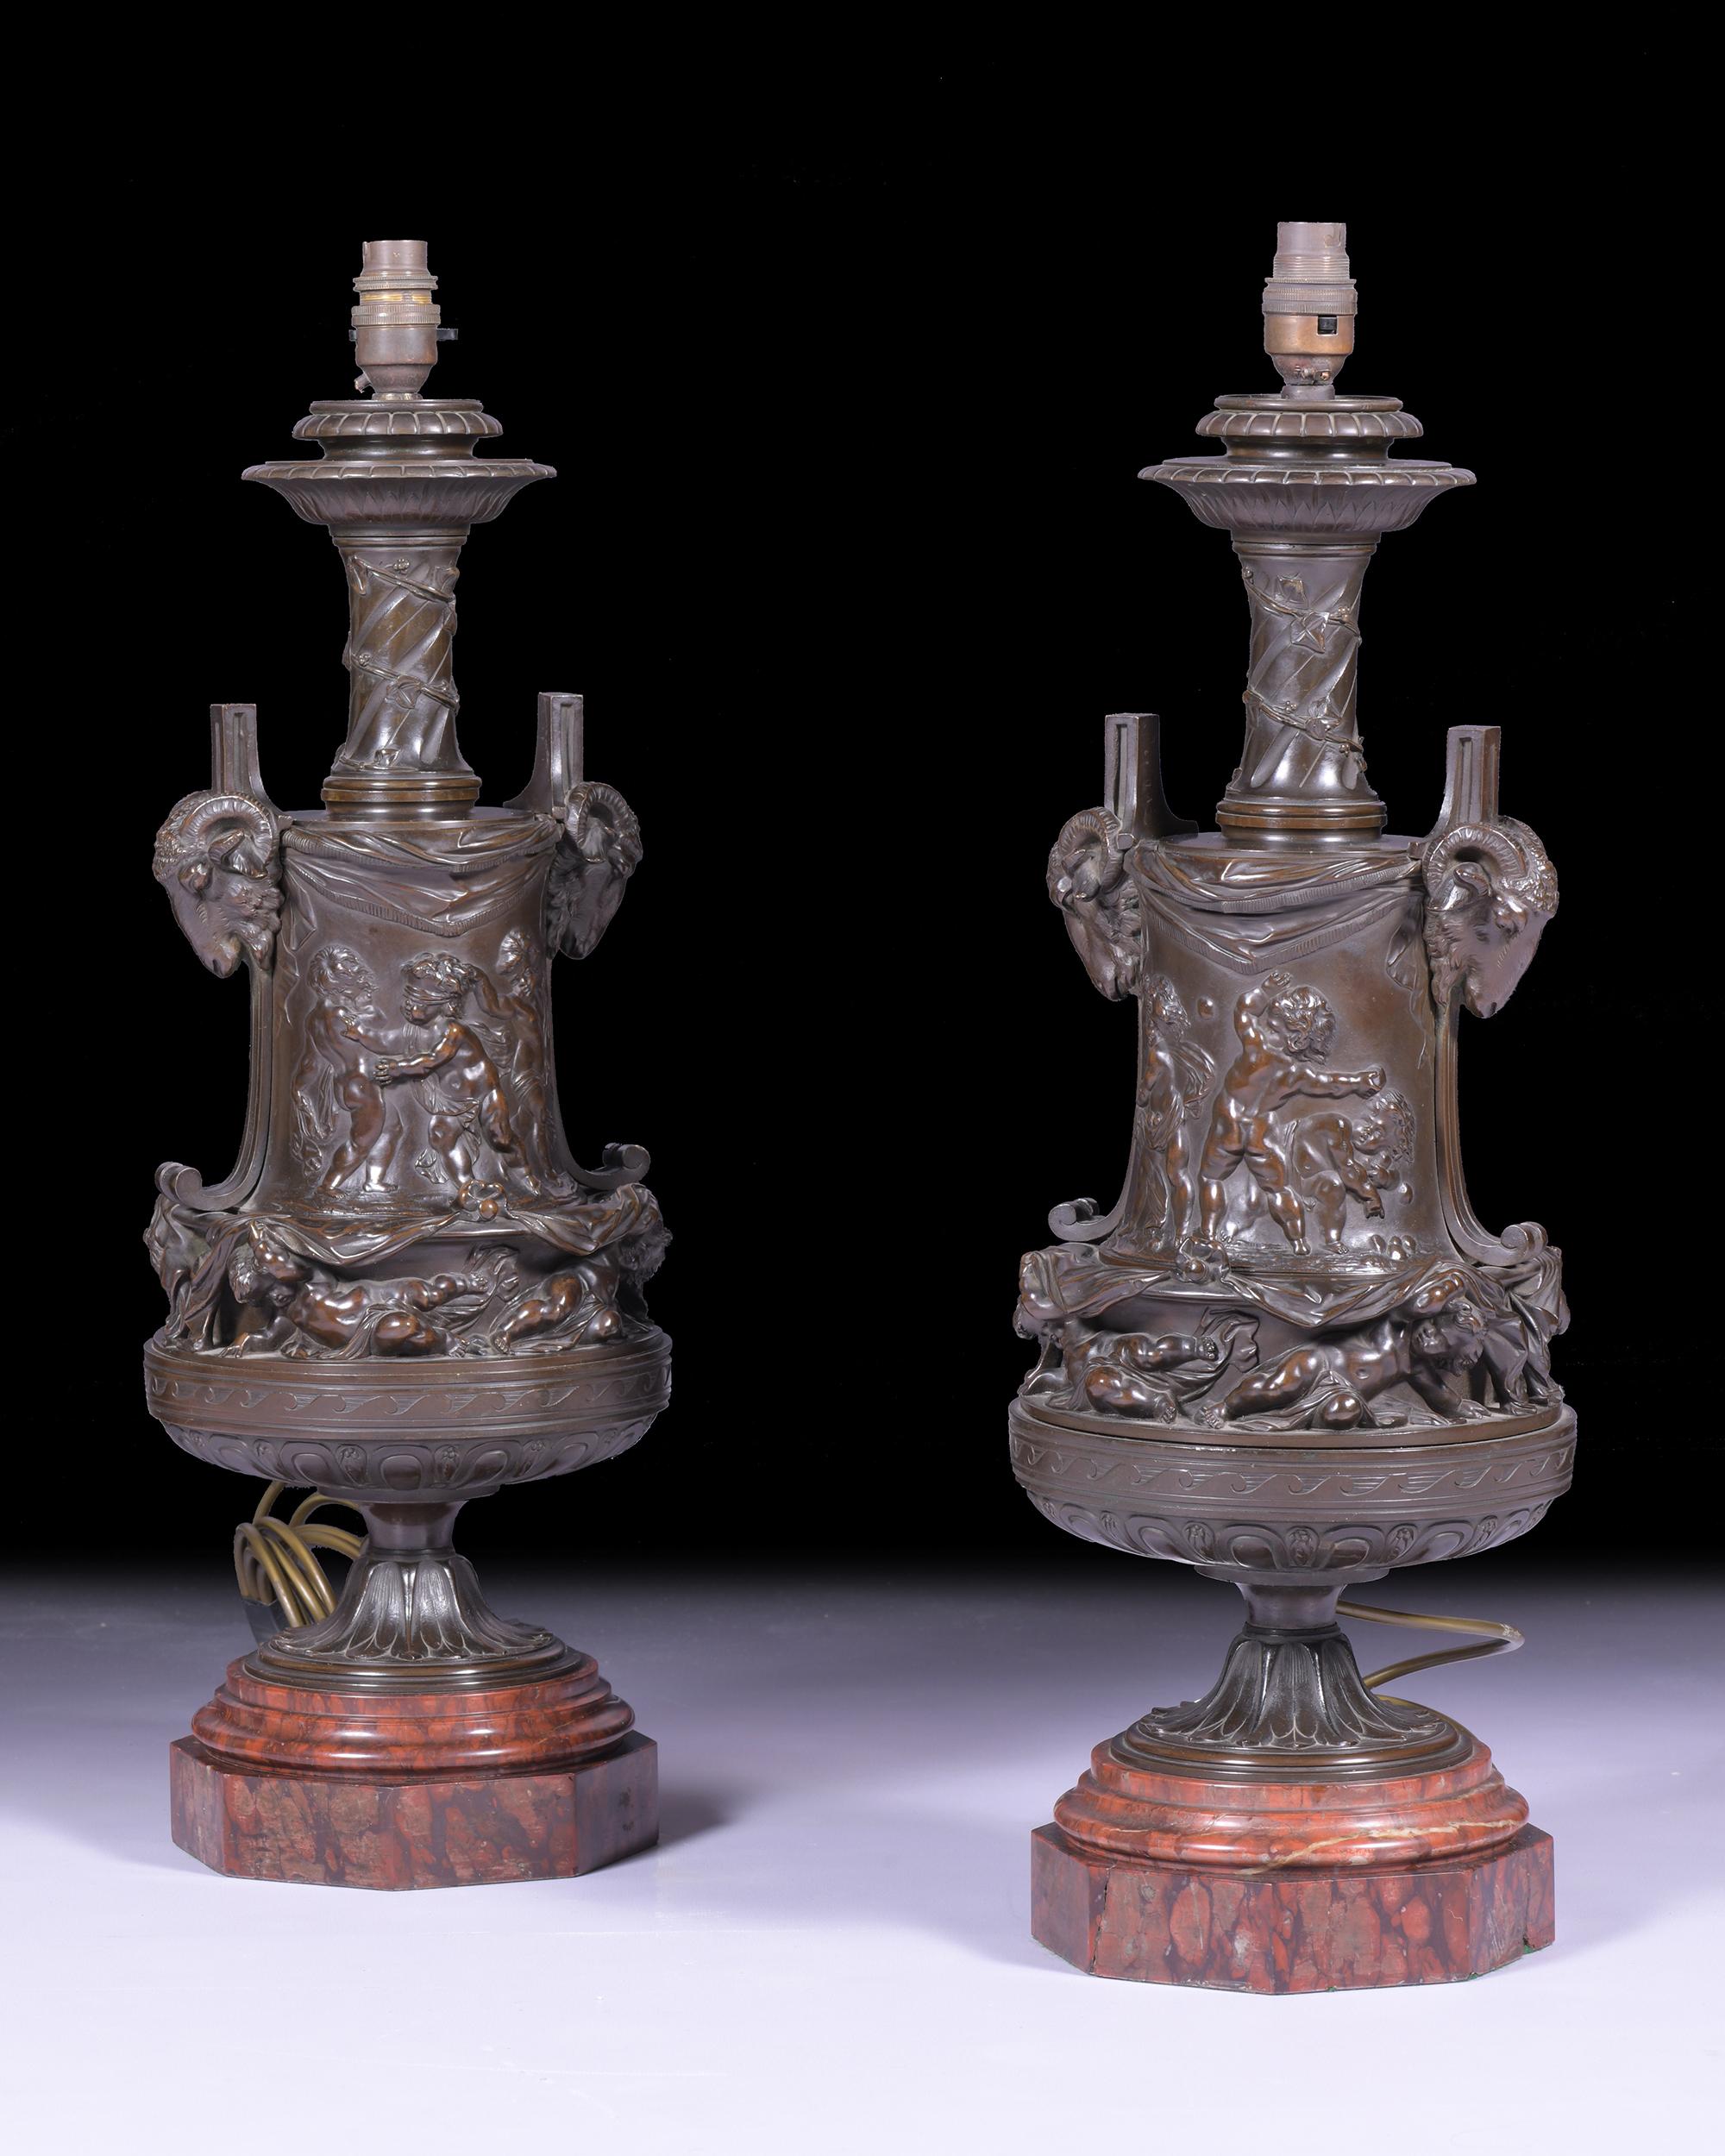 A superb pair of 19th century bronze lamps, with classical scenes depicting frolicking cherubs in relief, flanked by goat head masks to the sides on stepped rouge marble bases terminating on a hexagonal shaped base.

Circa